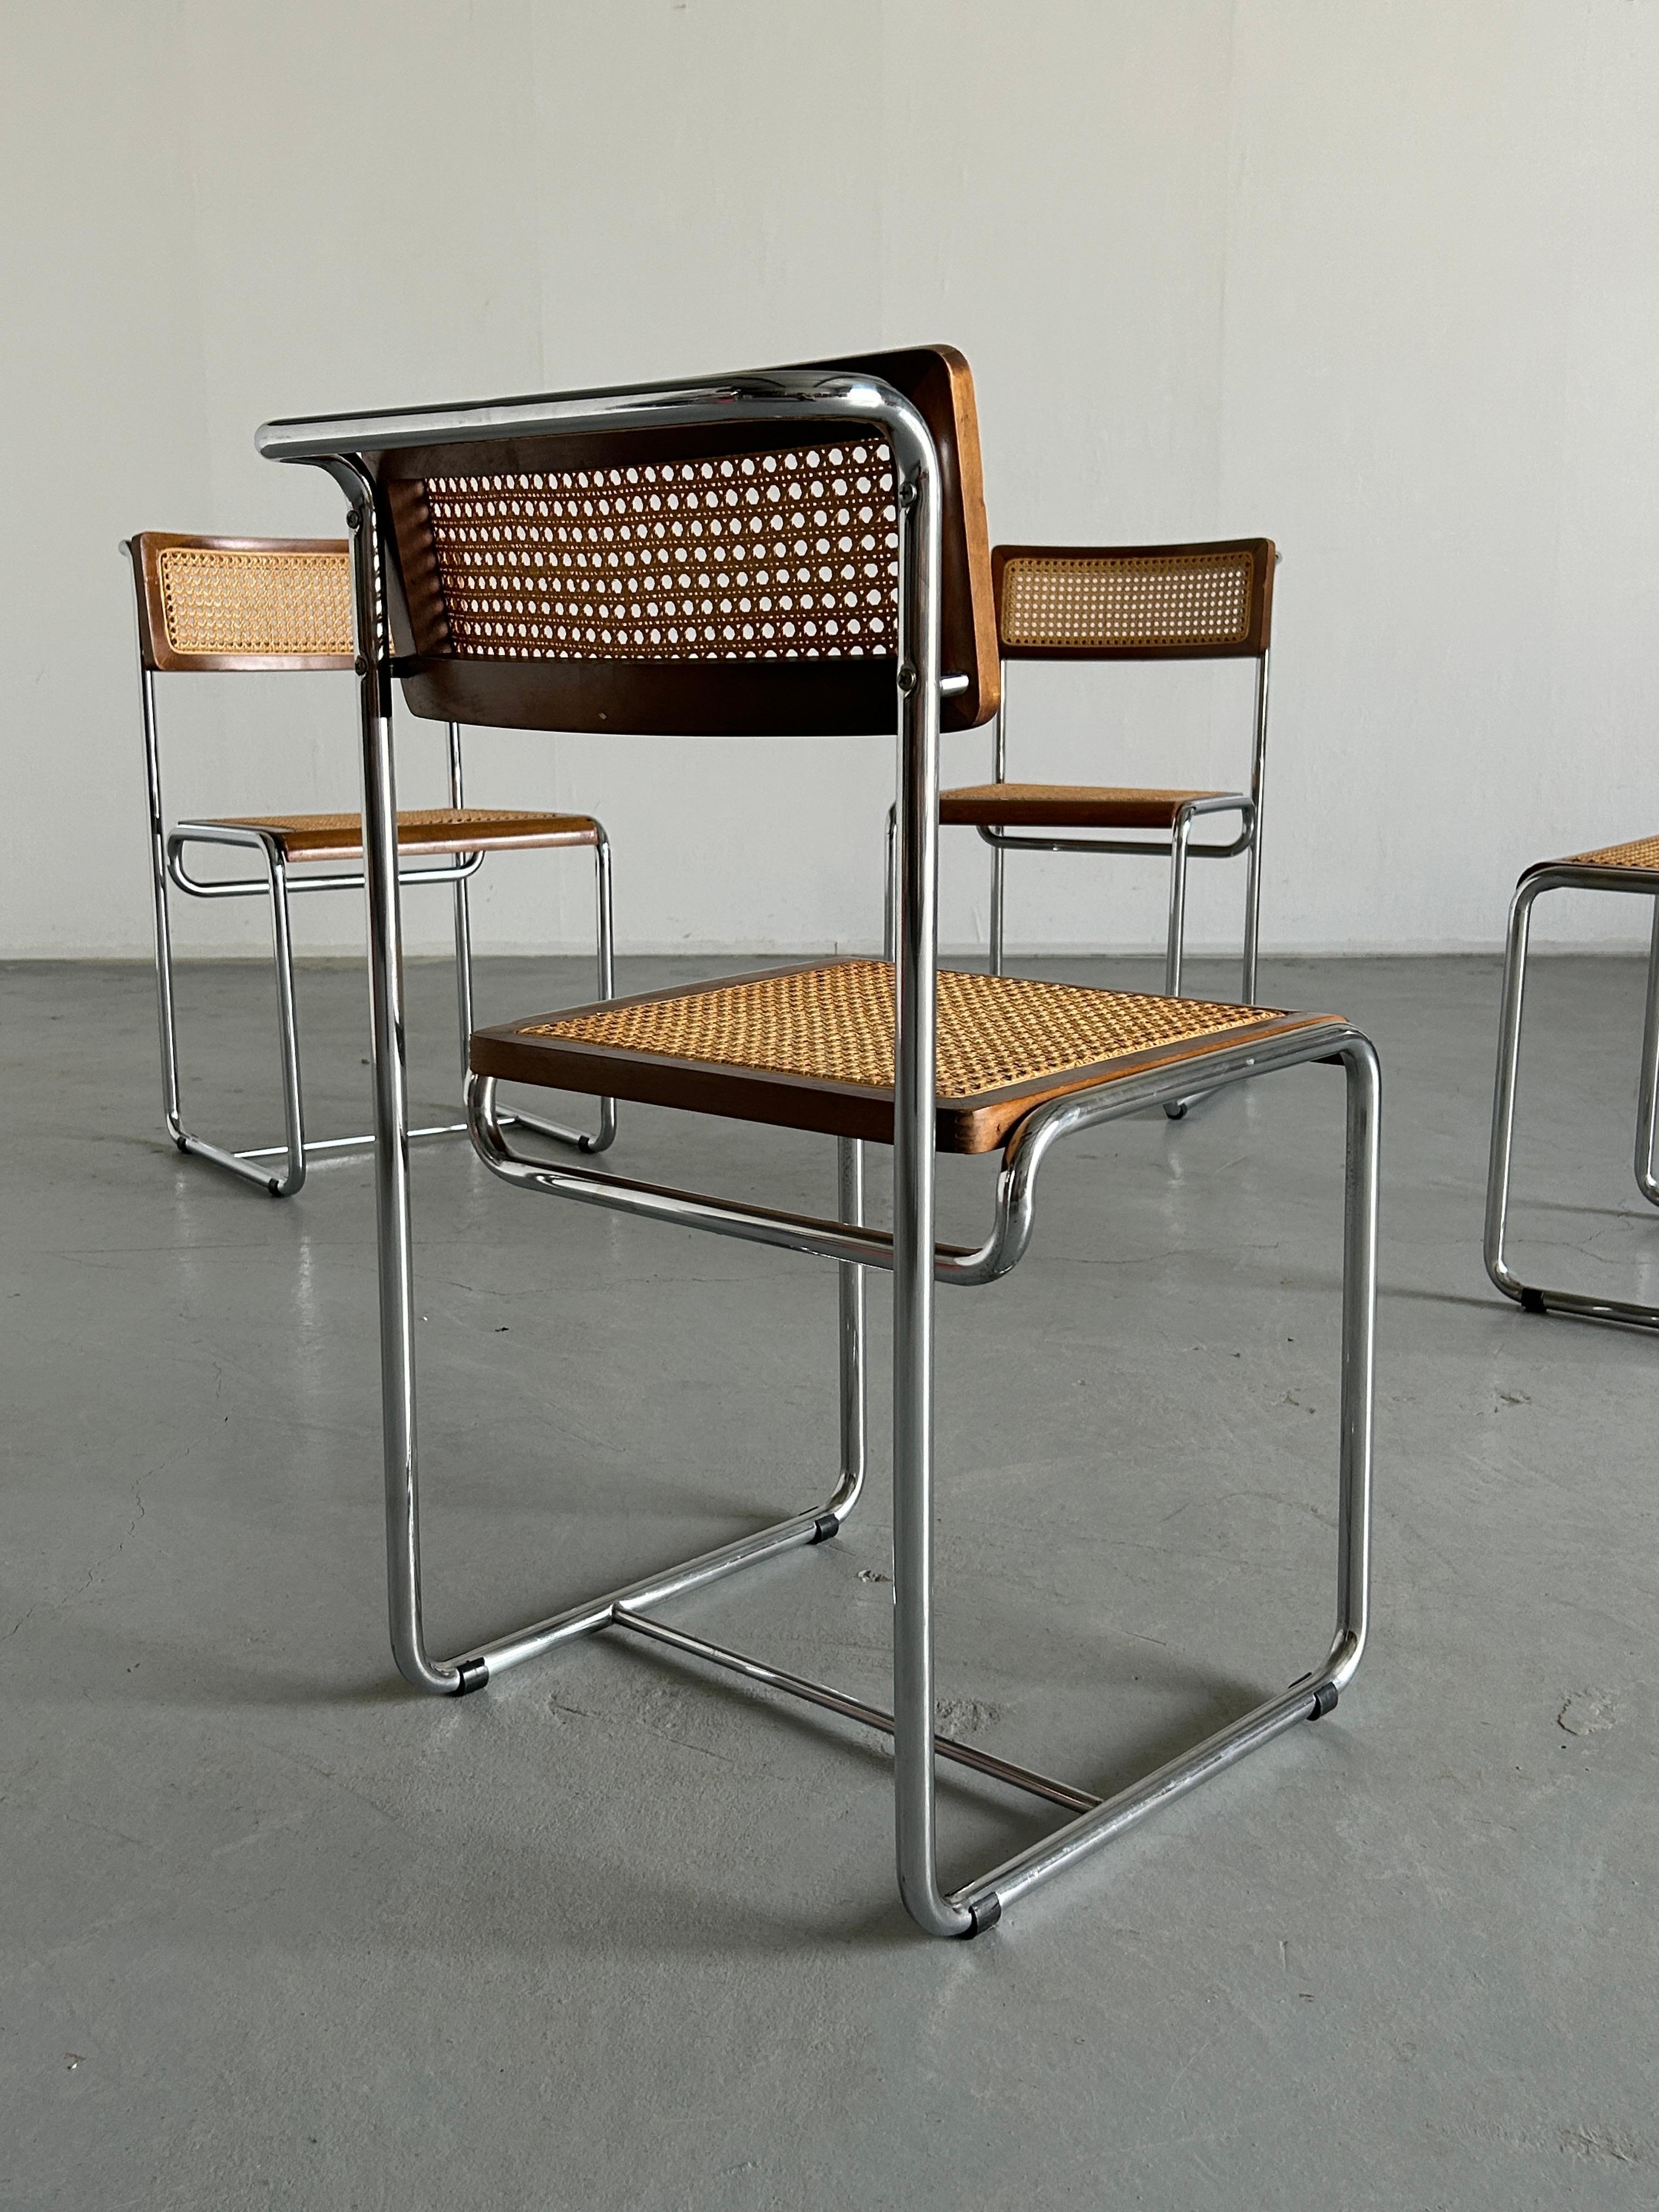 Set of 4 Mid-Century Dining Chairs in Bent Tubular Steel and Wicker Cane, 1960s For Sale 4